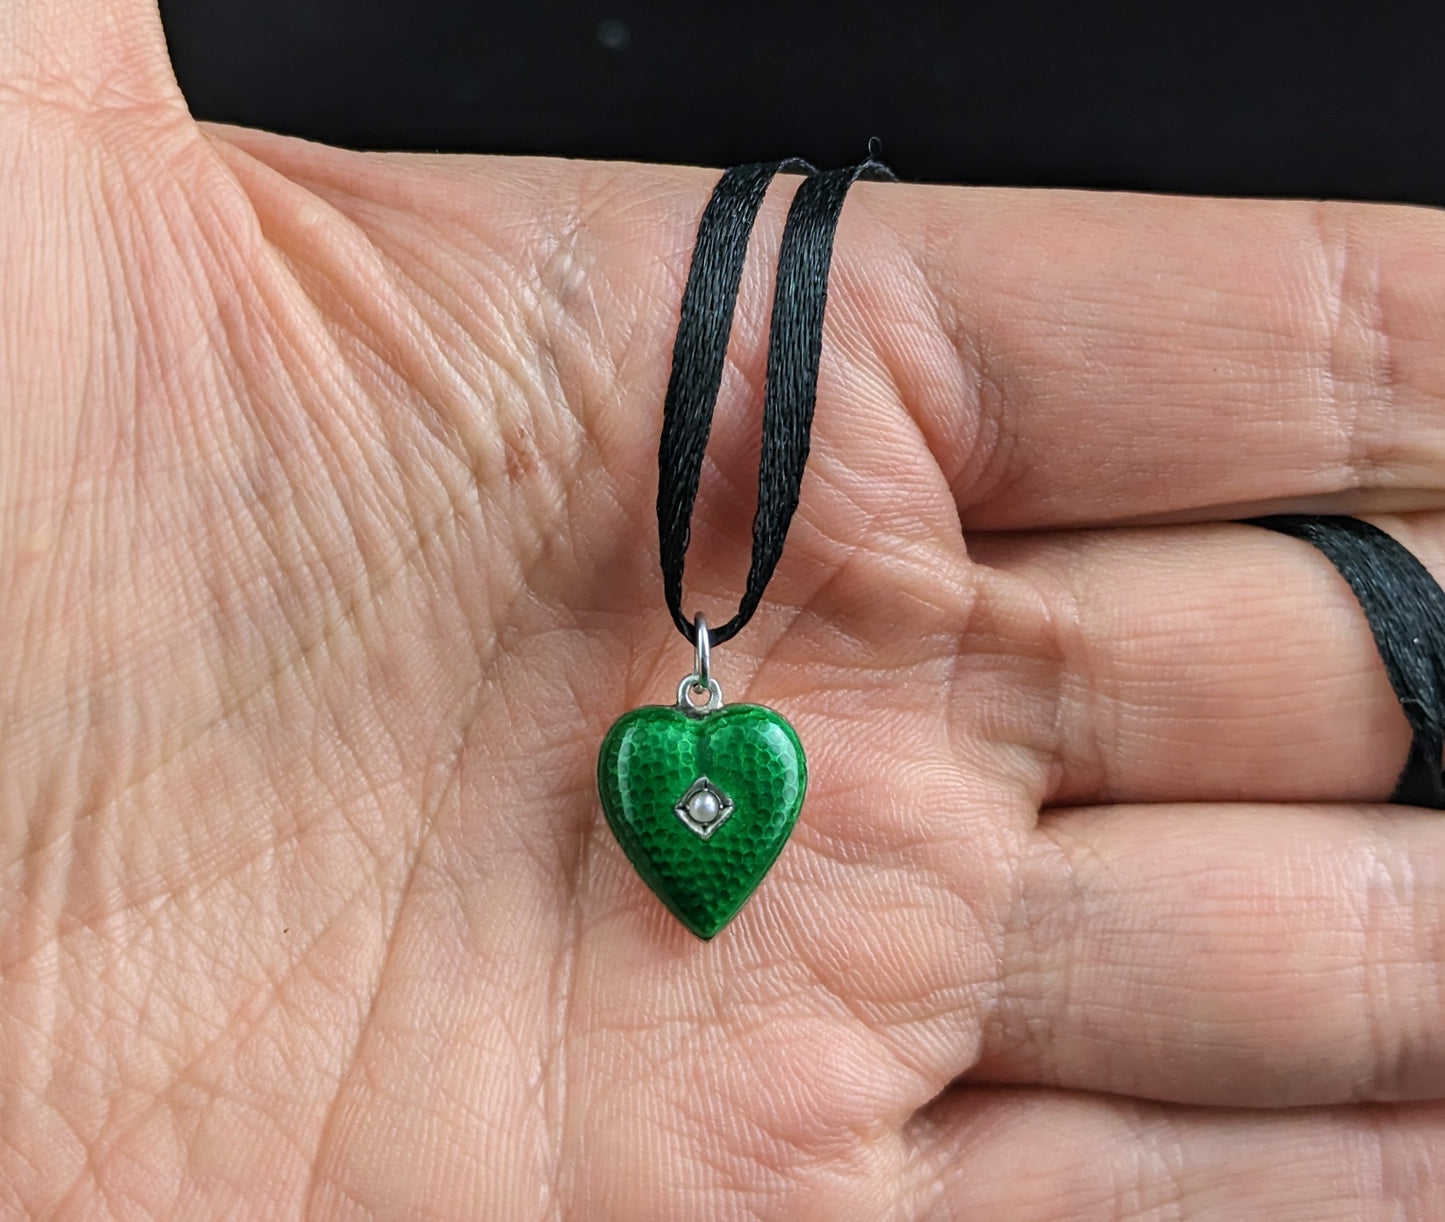 Vintage Art Deco silver and green enamel heart pendant, Seed pearl